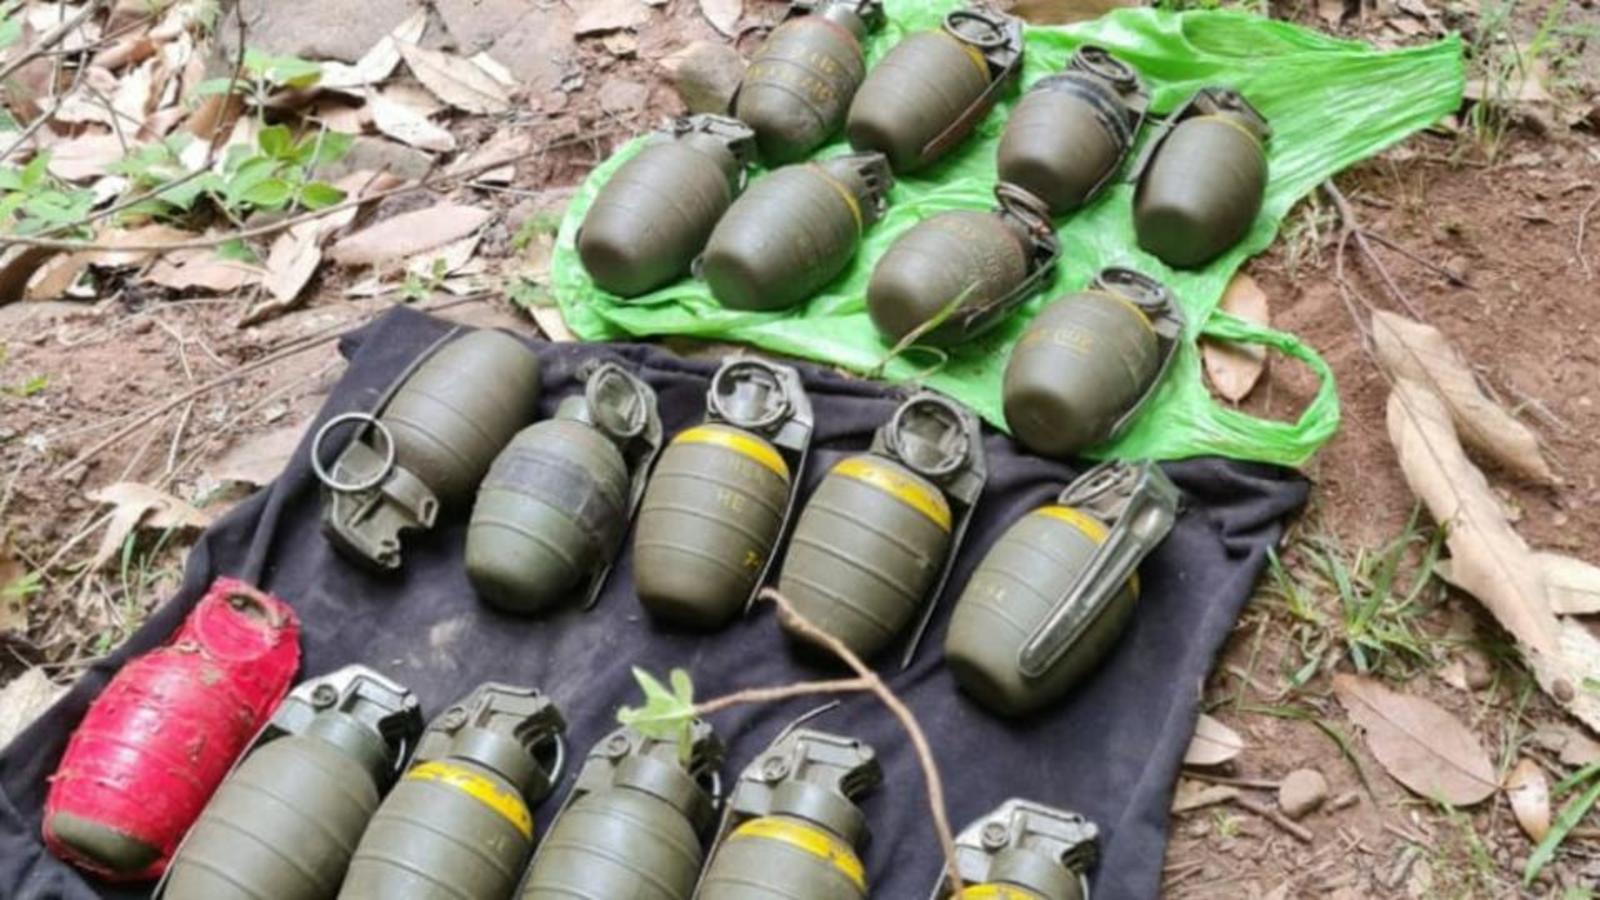 Major terror bid foiled in Jammu and Kashmir, 19 grenades recovered in  Poonch | Latest News India - Hindustan Times